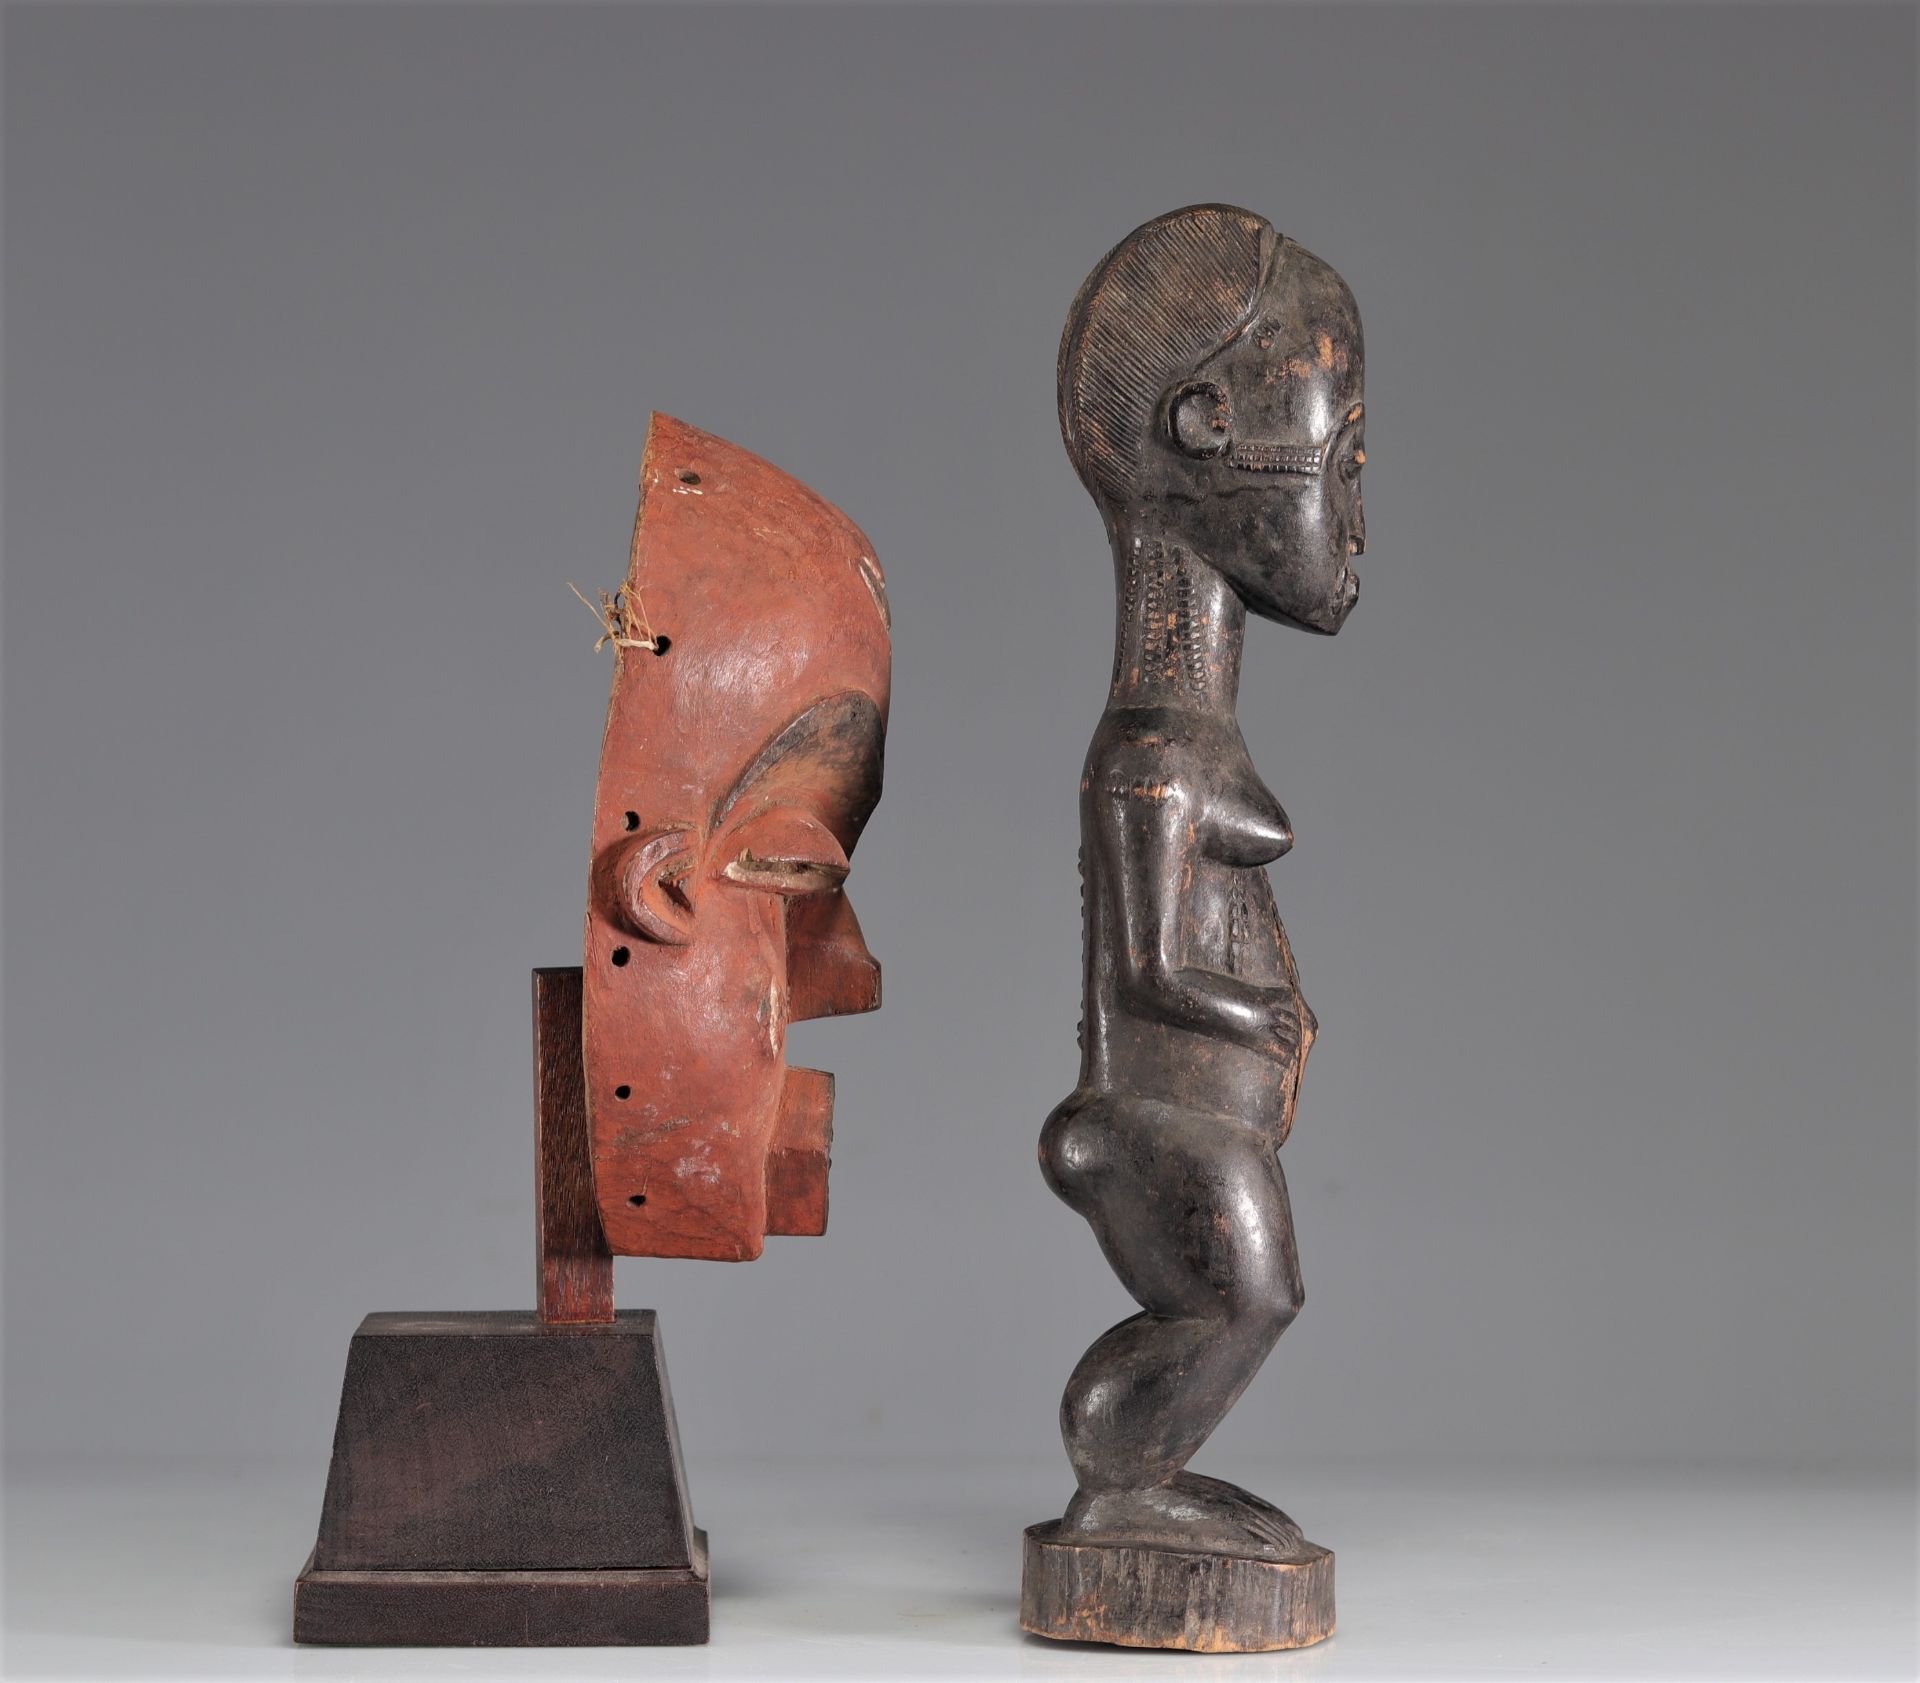 Baoule statue with dark patina joined with an African mask - Image 3 of 5